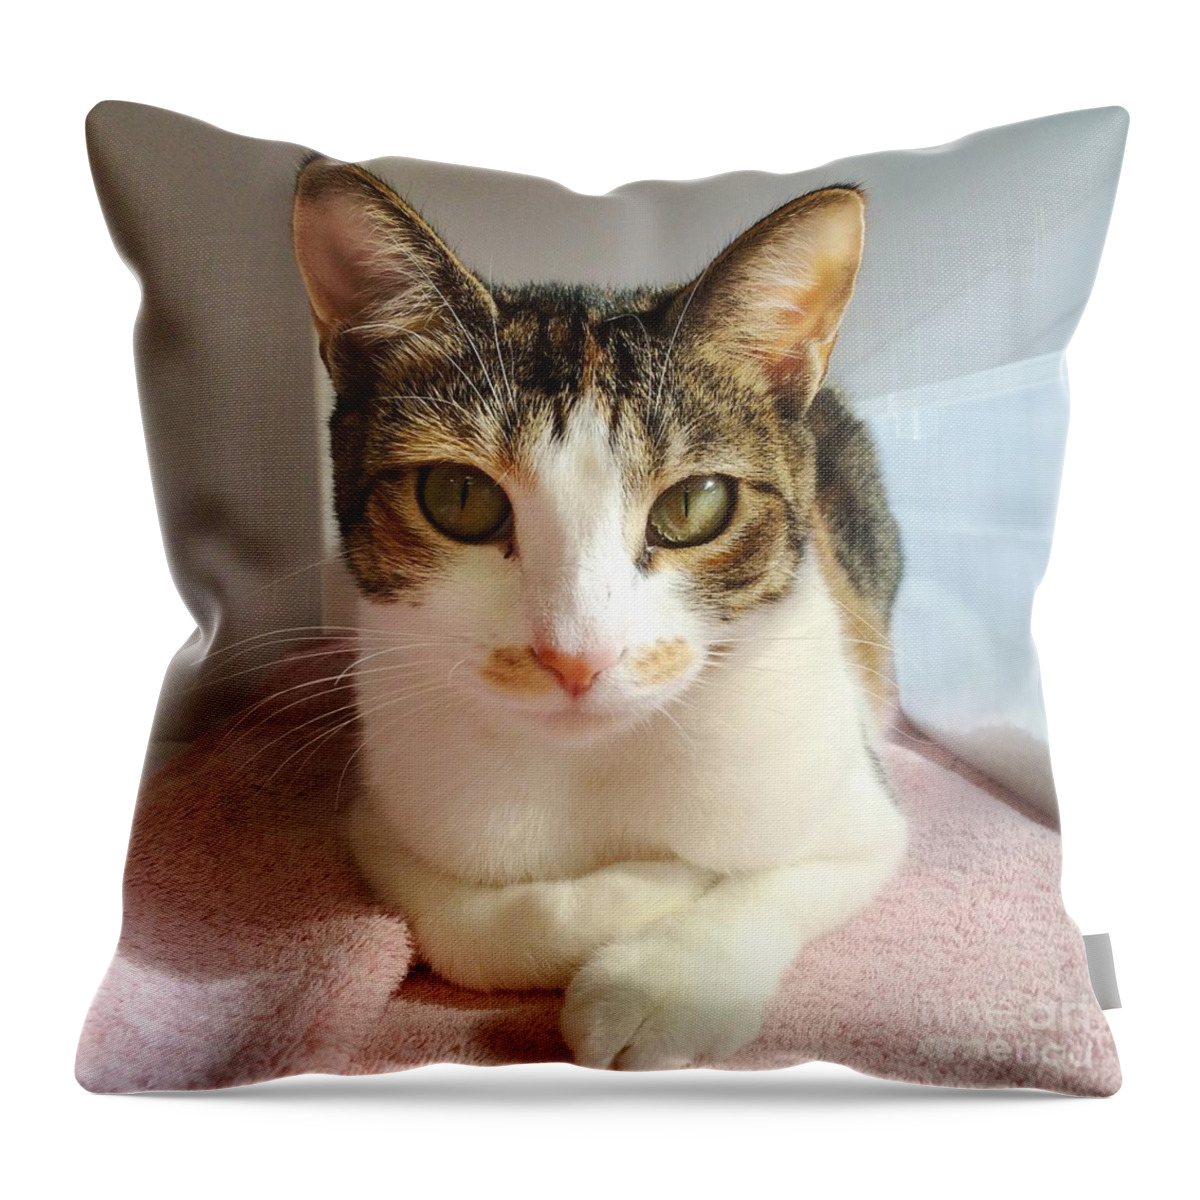 Domestic Cat Throw Pillow featuring the photograph Cat Portrait by Diane Macdonald